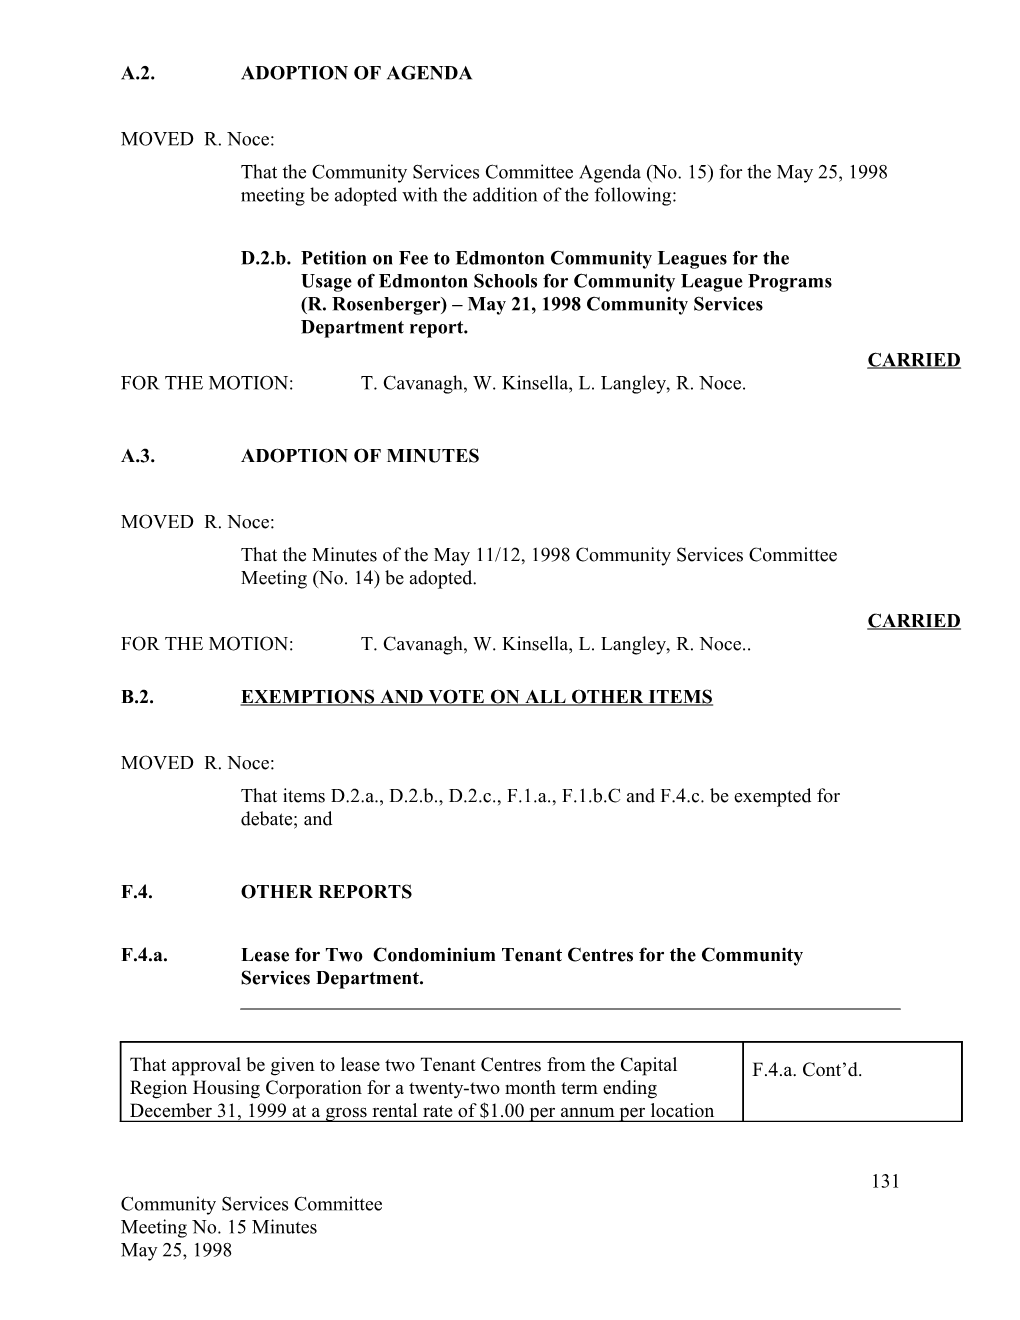 Minutes for Community Services Committee May 25, 1998 Meeting